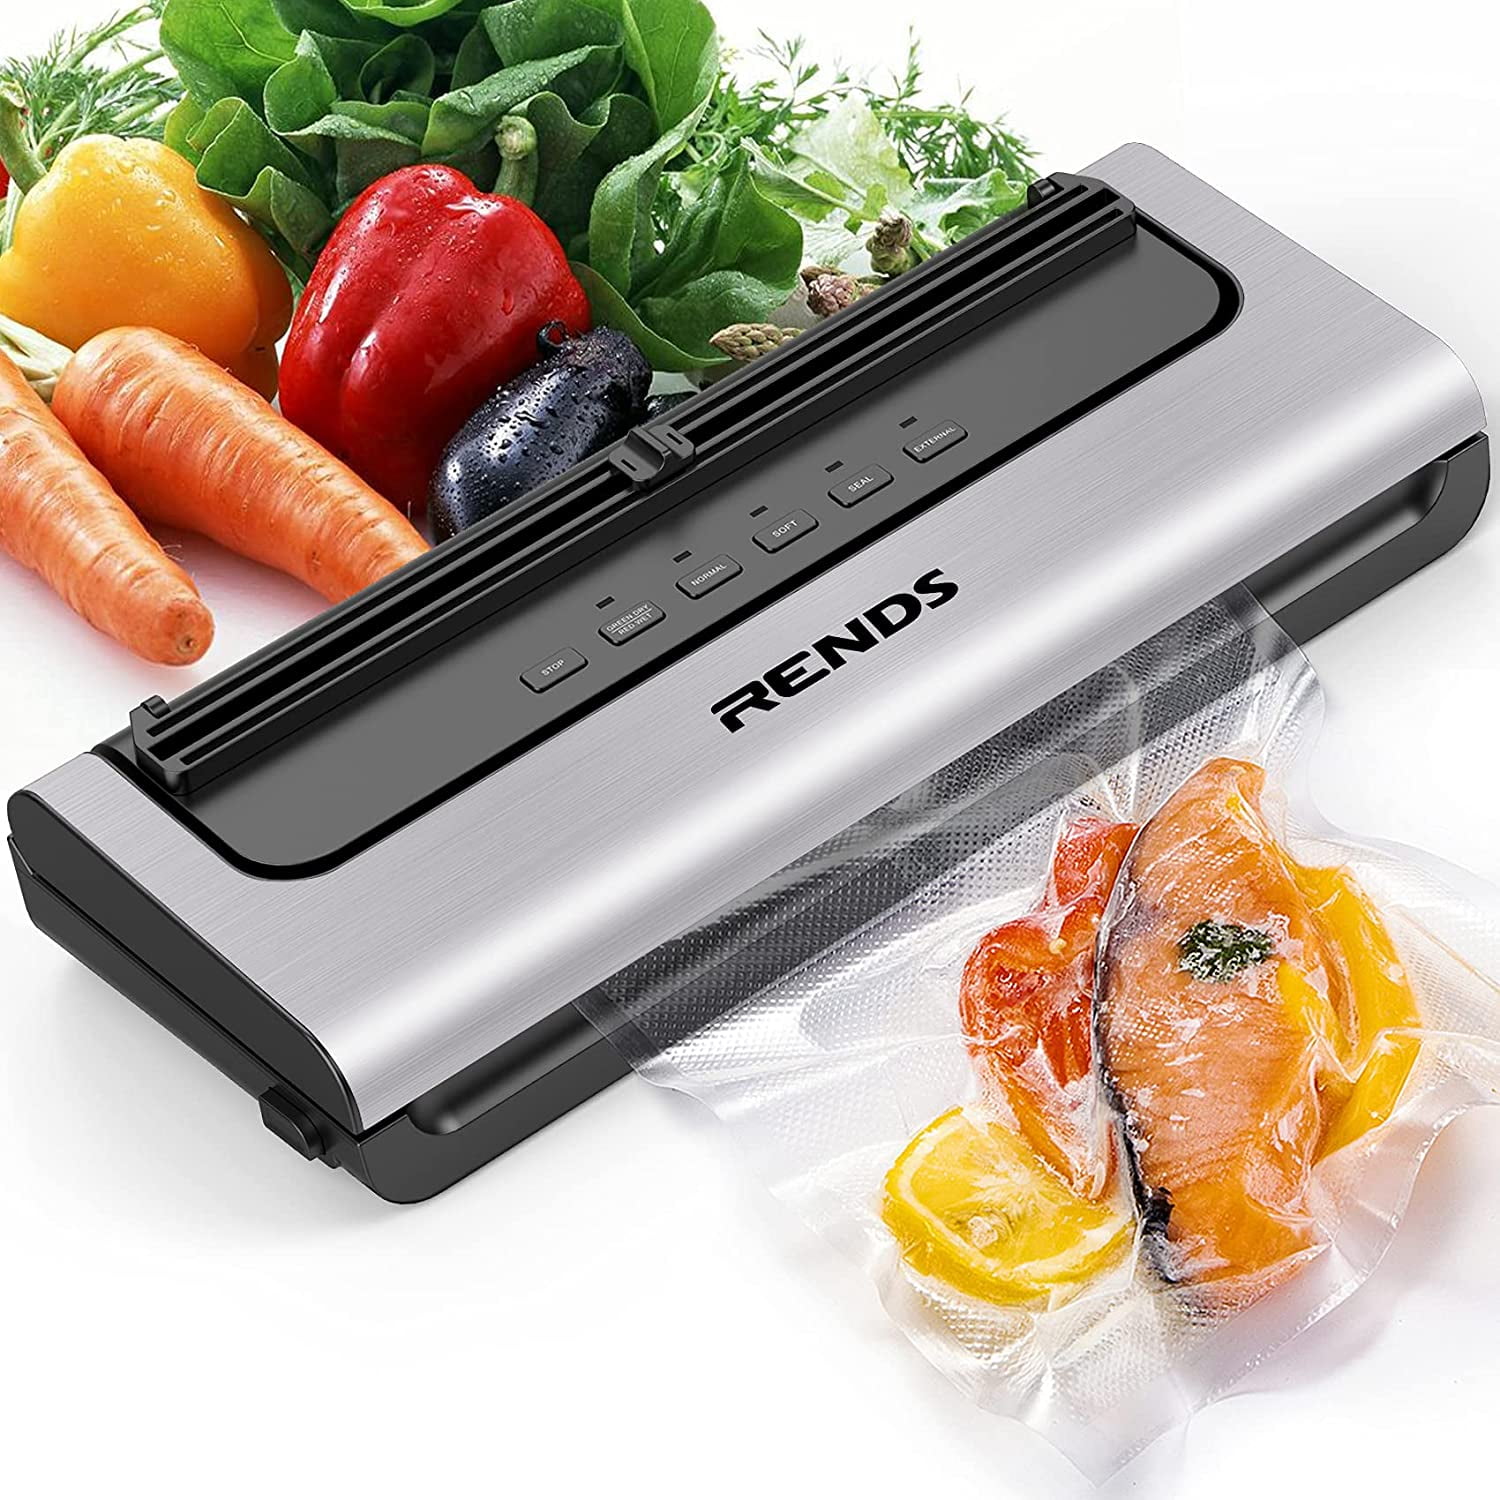 Rends Vacuum Machine, Automatic Food Sealer Built-in Air Sealing with Cutter and Starter Kit, Dry/Moist Model & External Suction Design Vacuum Machine for Food Preservation - Walmart.com